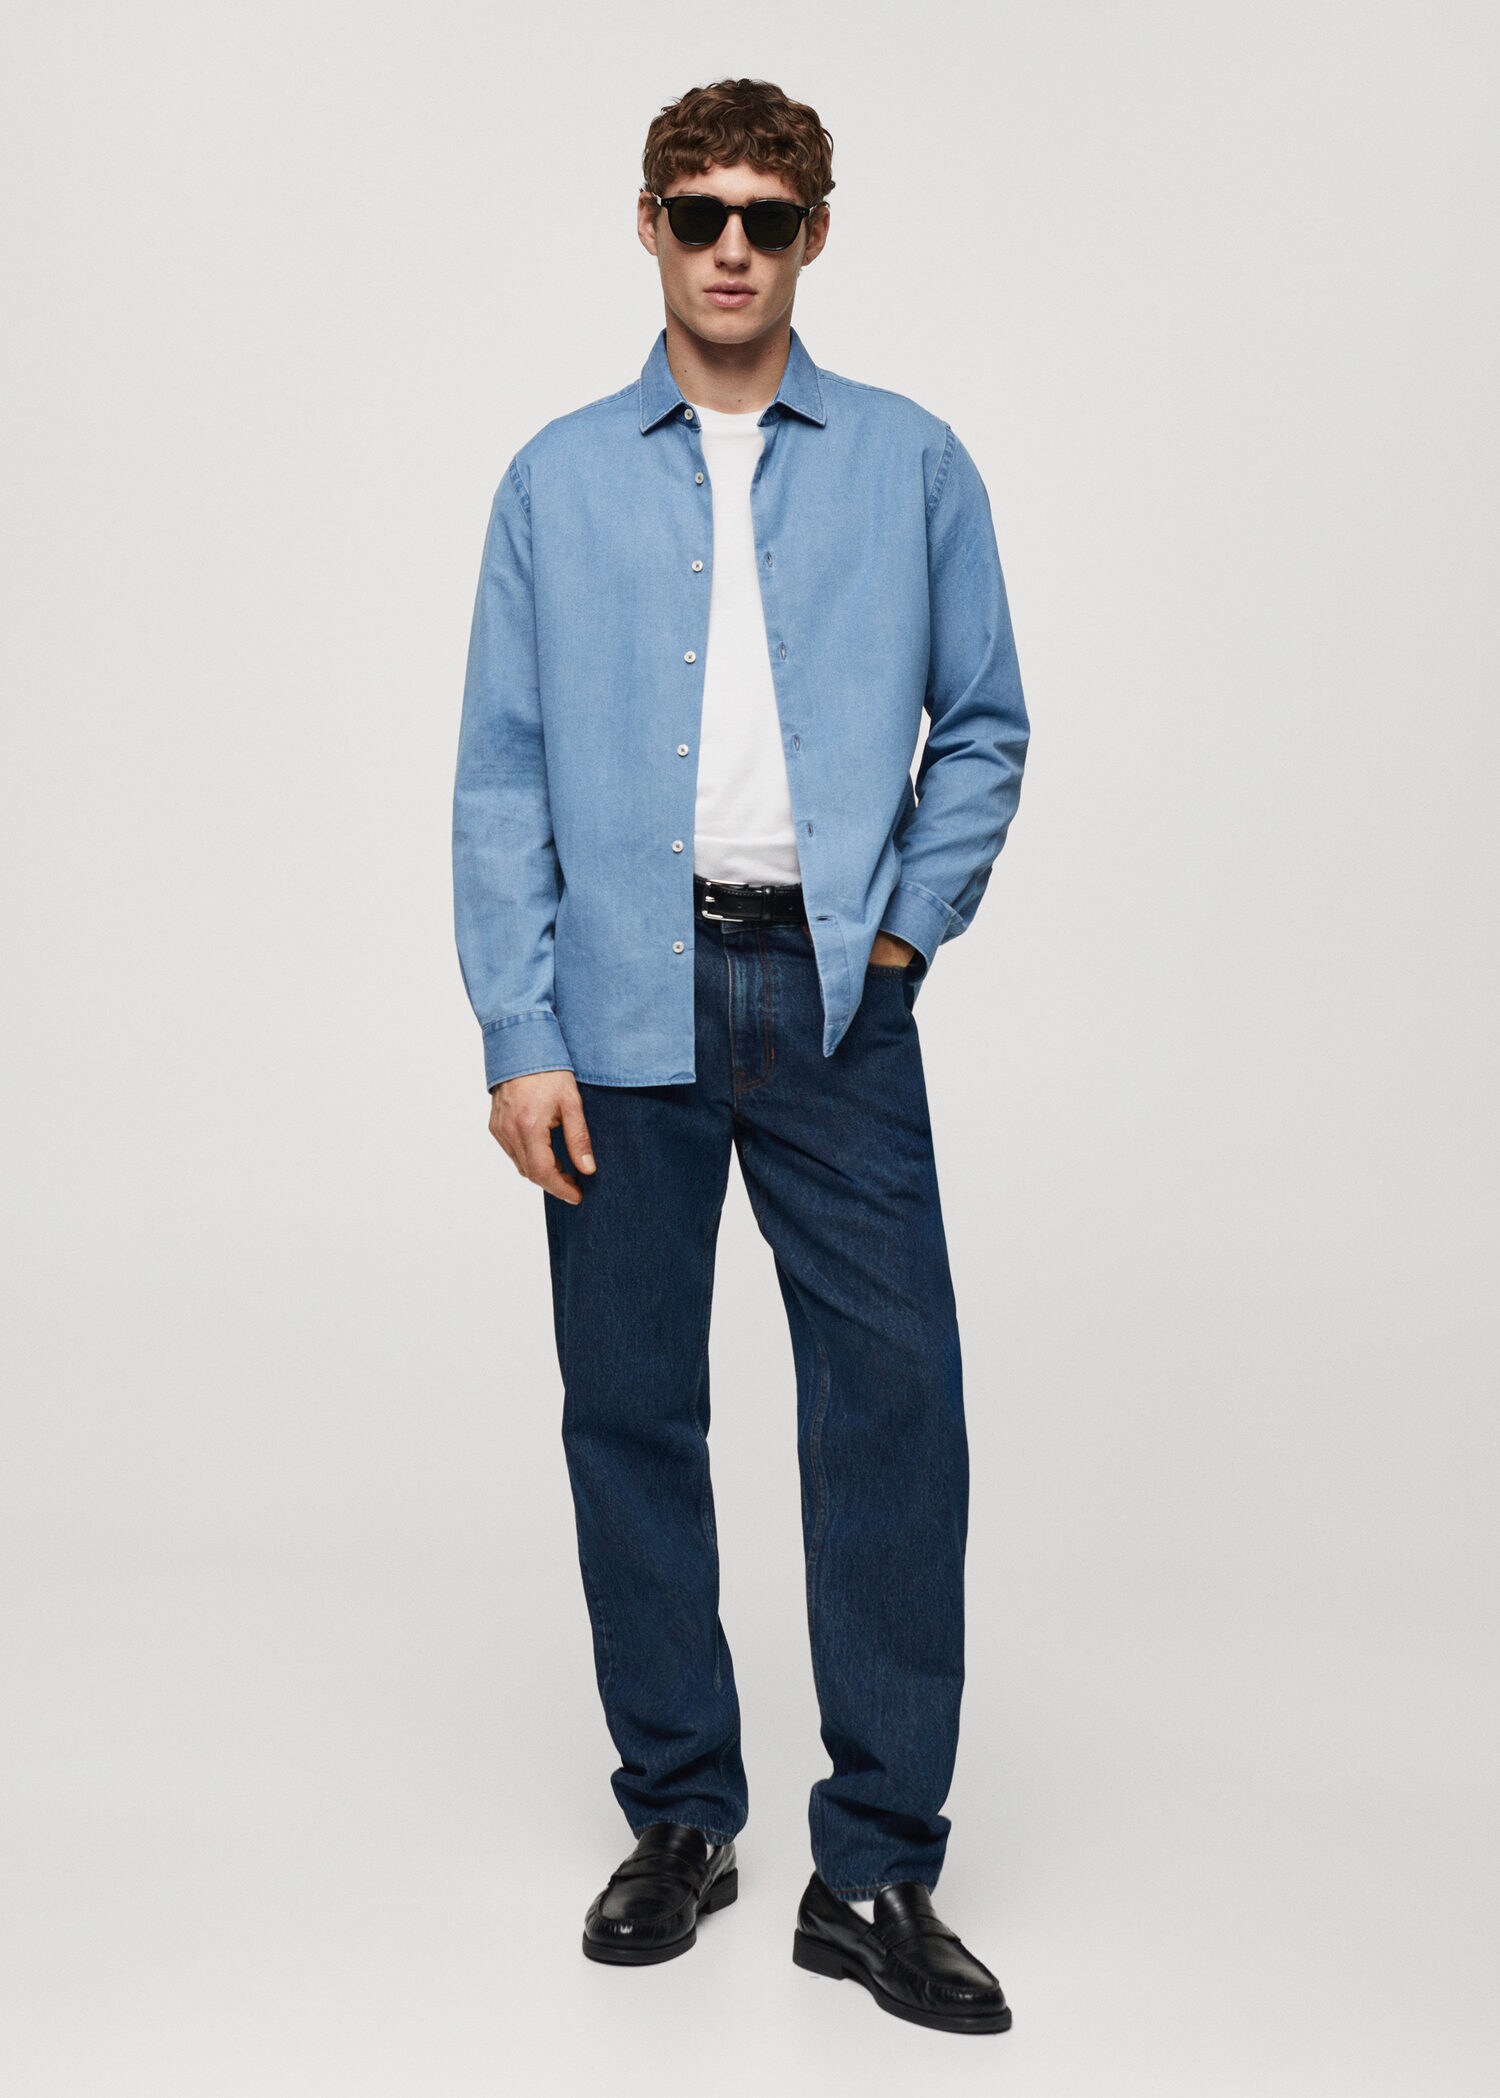 5 Different Ways to Wear a Chambray Shirt - He Spoke Style